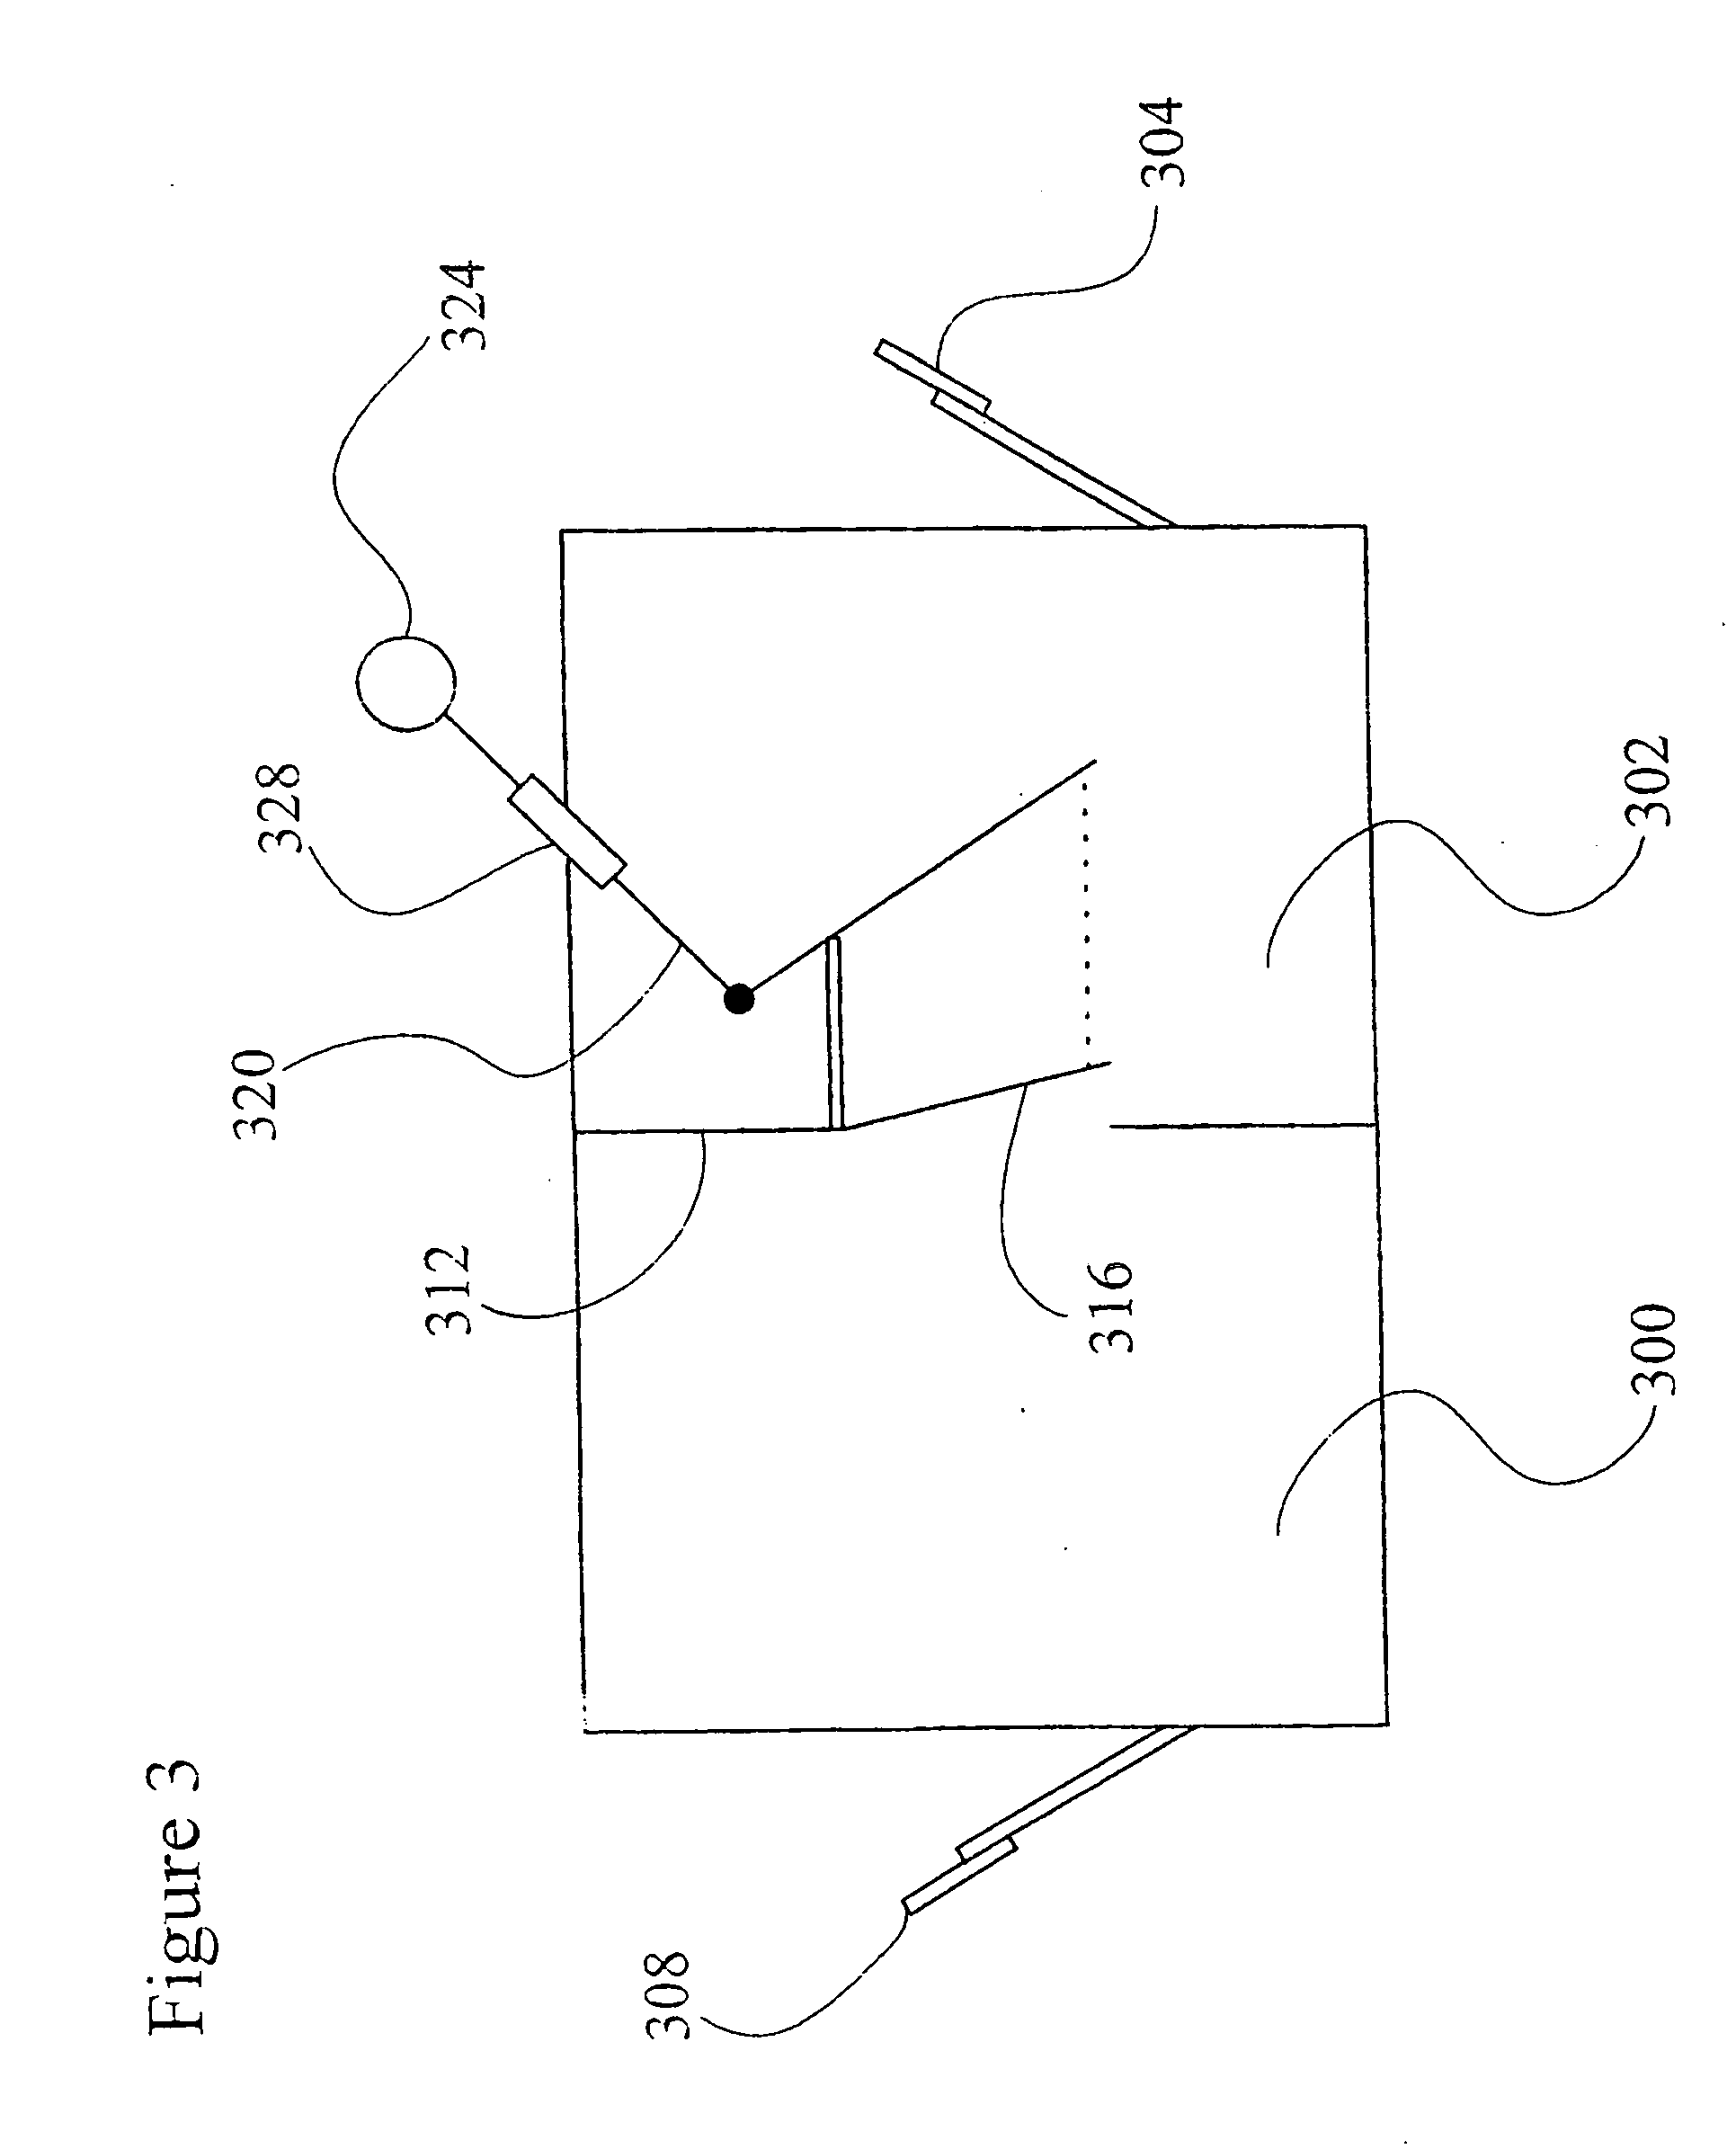 Apparatuses and methods for the production of haematophagous organisms and parasites suitable for vaccine production